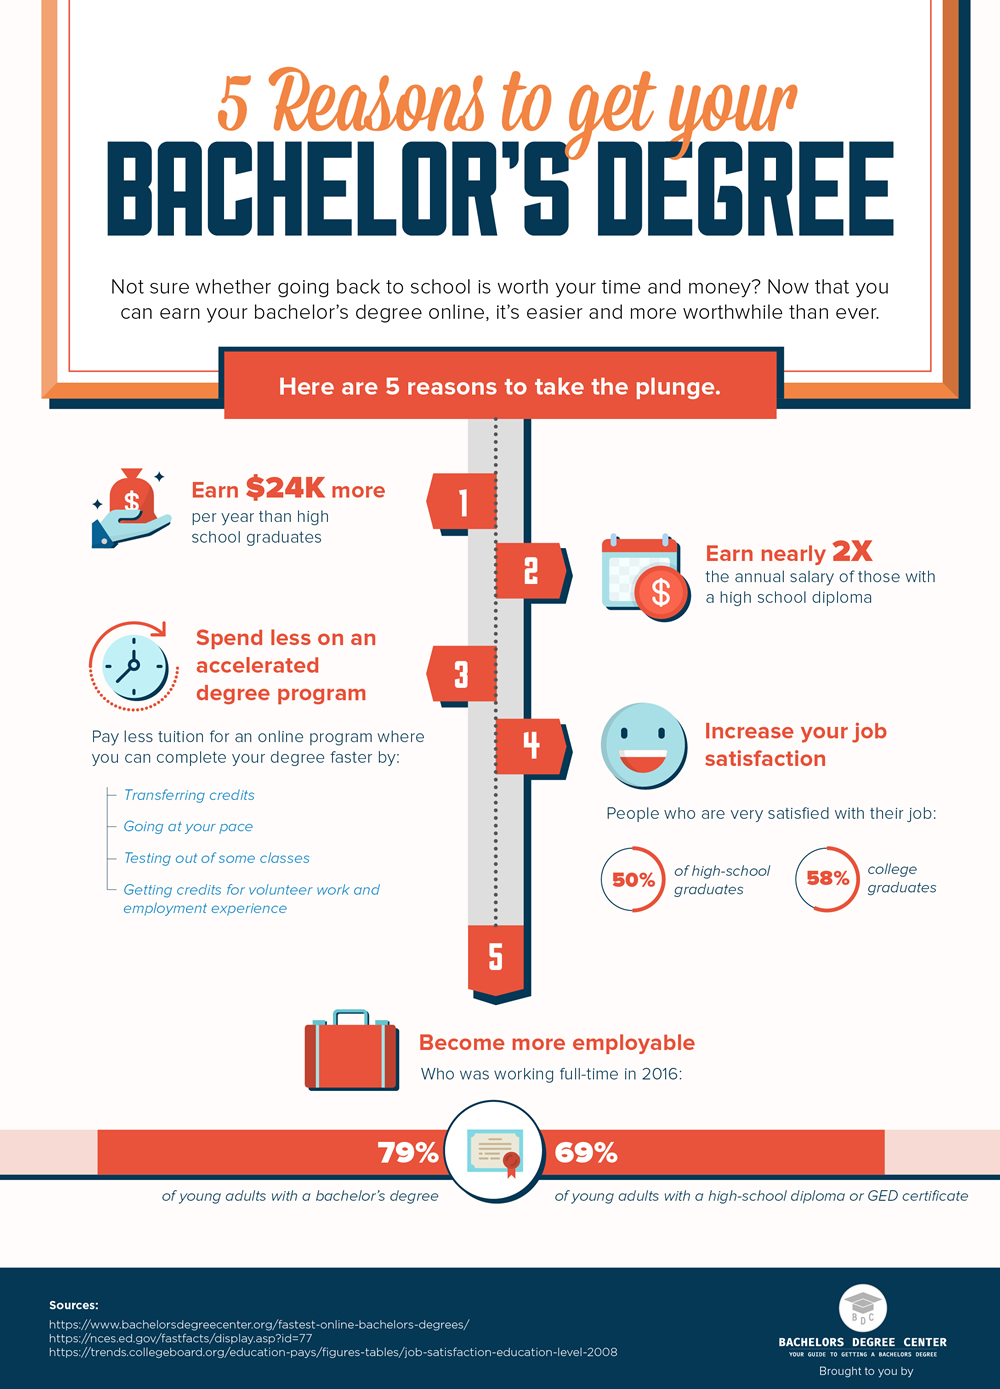 5 Reasons to Get A Bachelor’s Degree Bachelors Degree Center